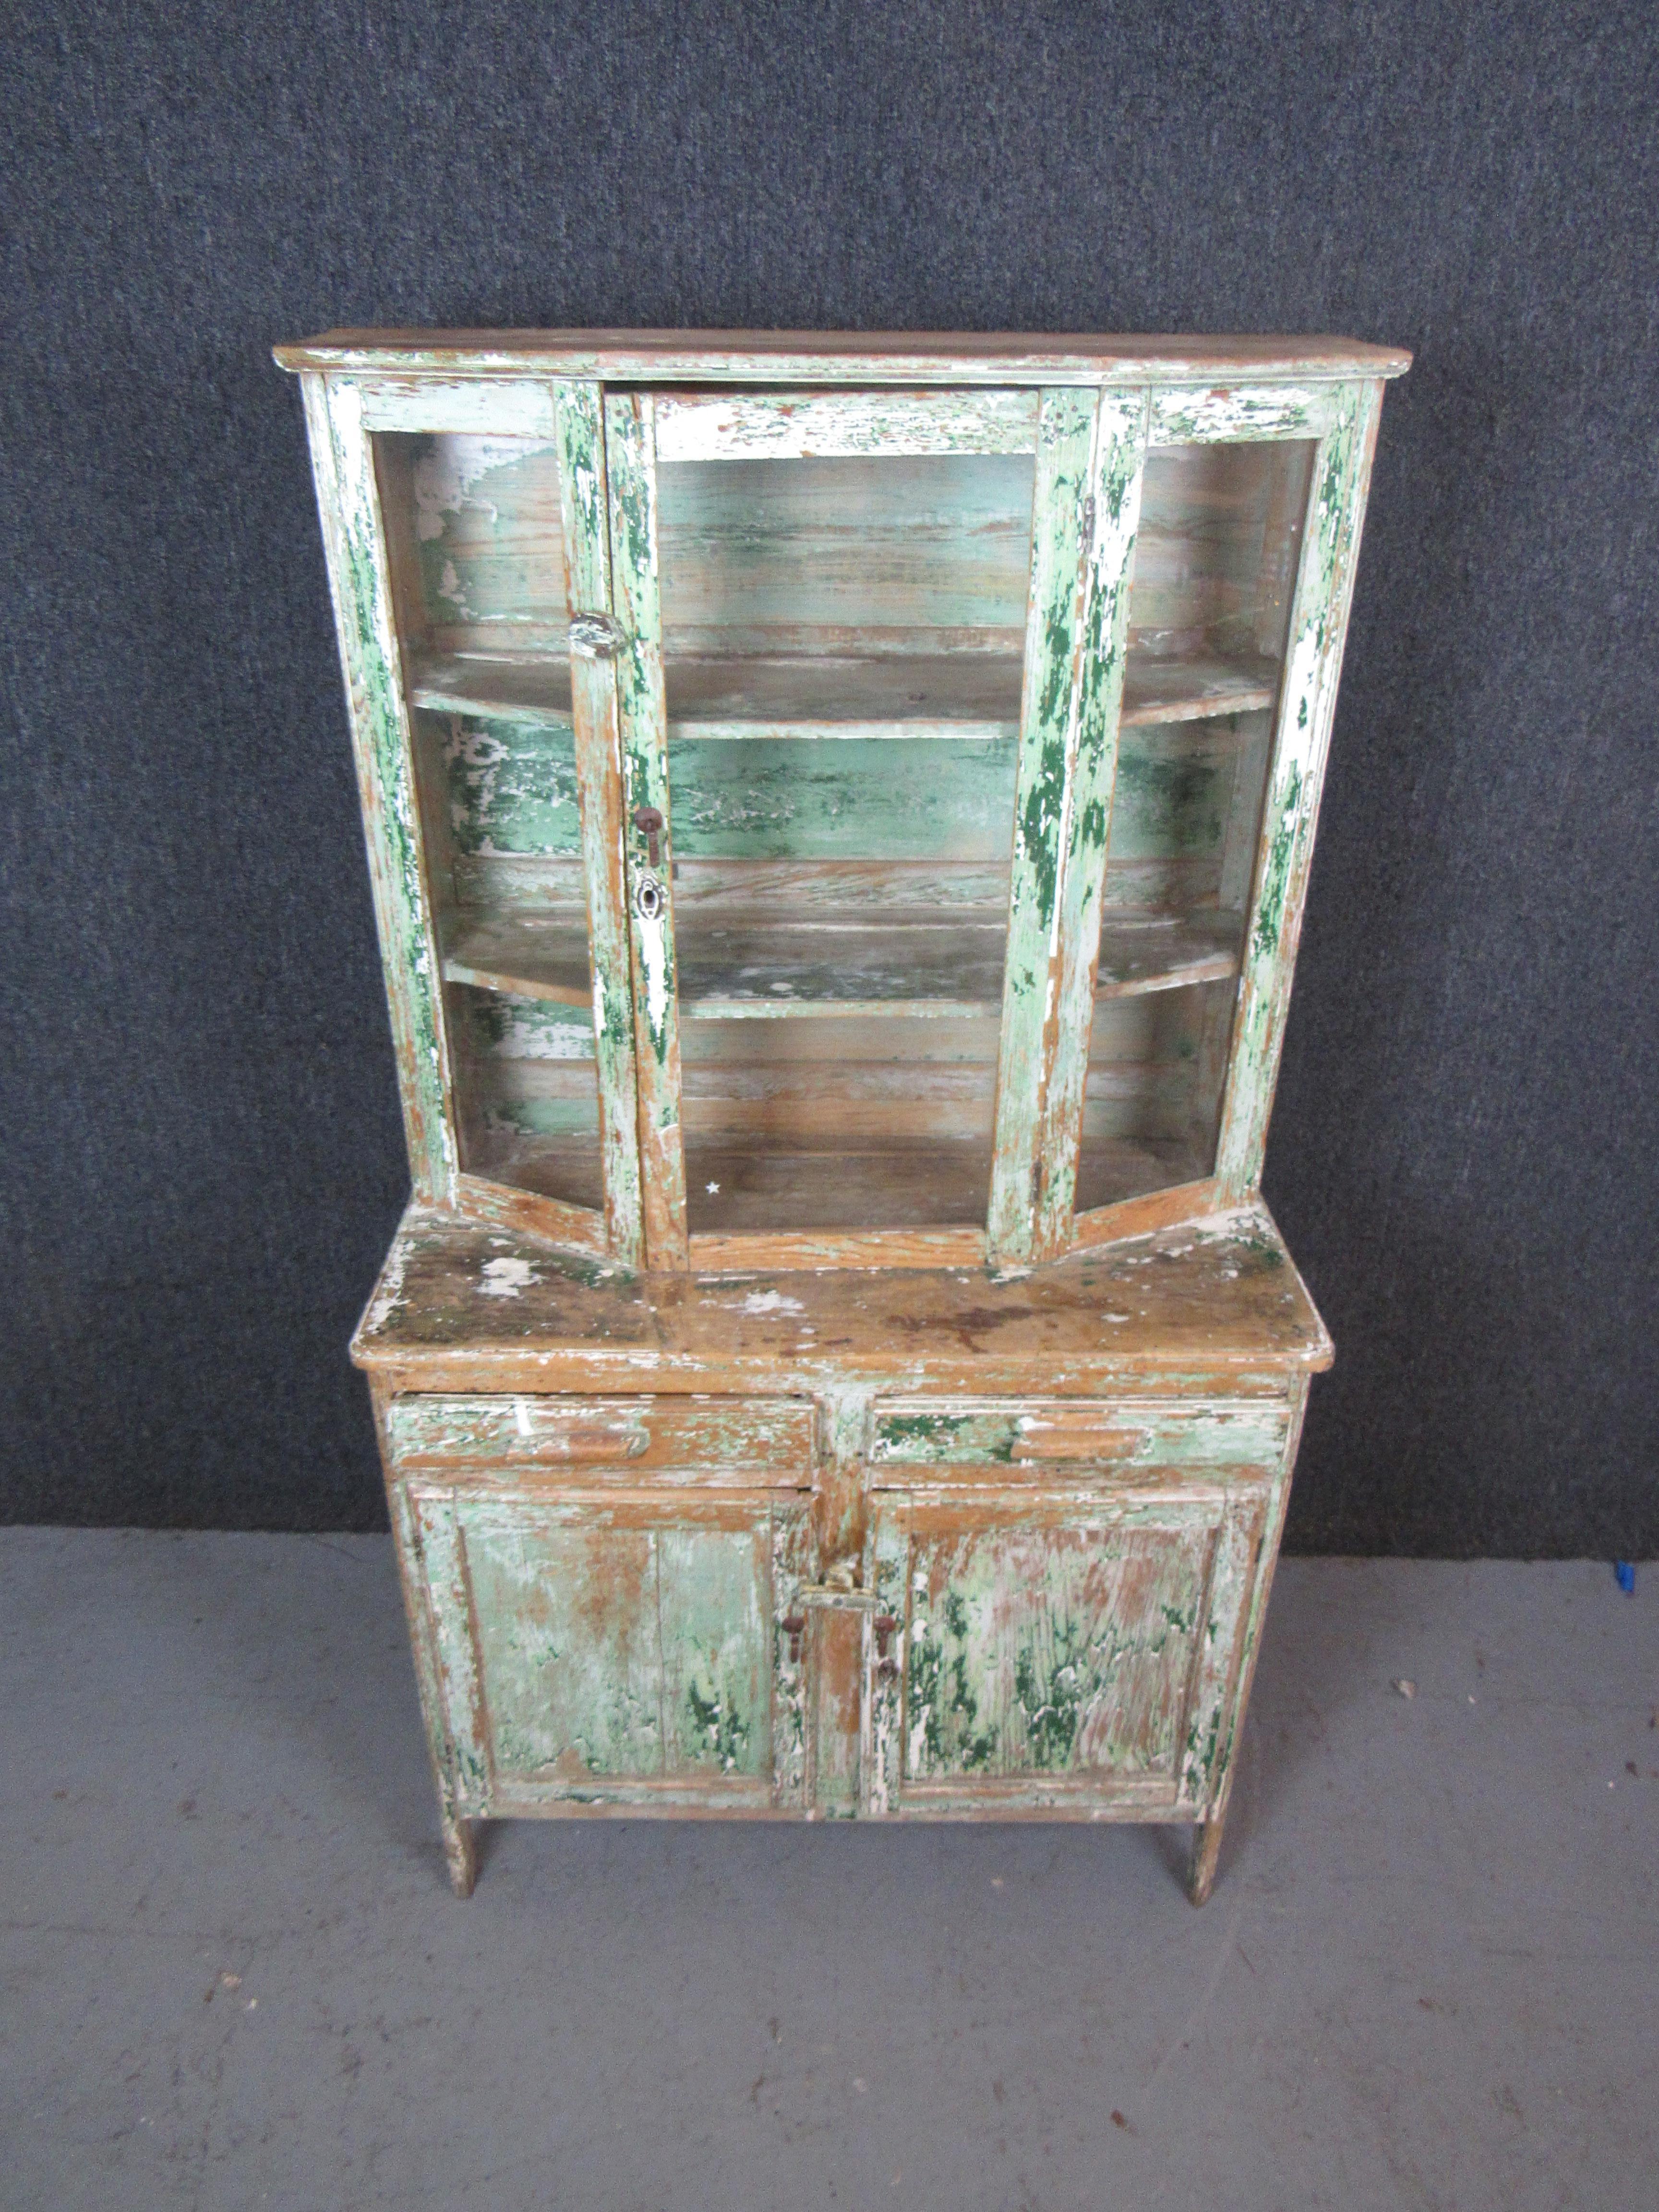 Bring home truly one-of-a-kind home decor with this stunningly distressed primitive Mexican solid pine hutch! Layers of green, blue, and white paint have steadily worn away over the years revealing the naturally knotty wood grain underneath. Heavily